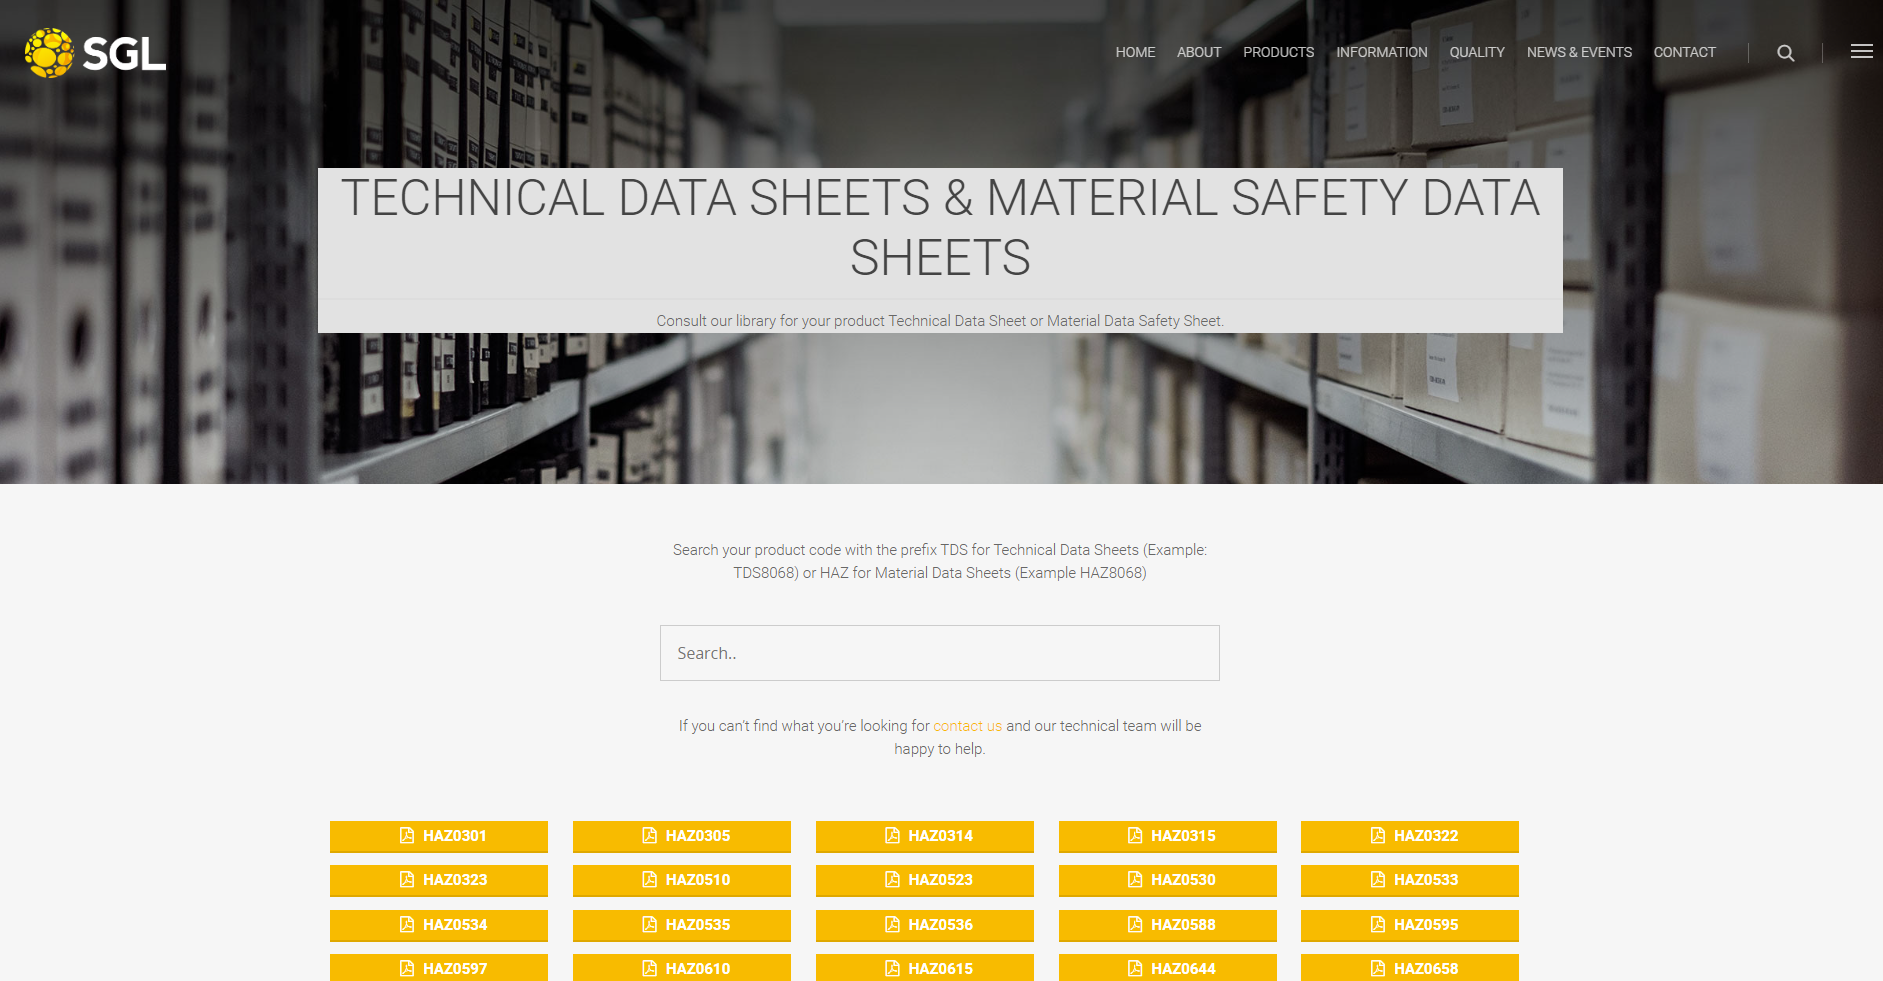 SGL Makes Product Technical Data Sheets (TDS) Available Online